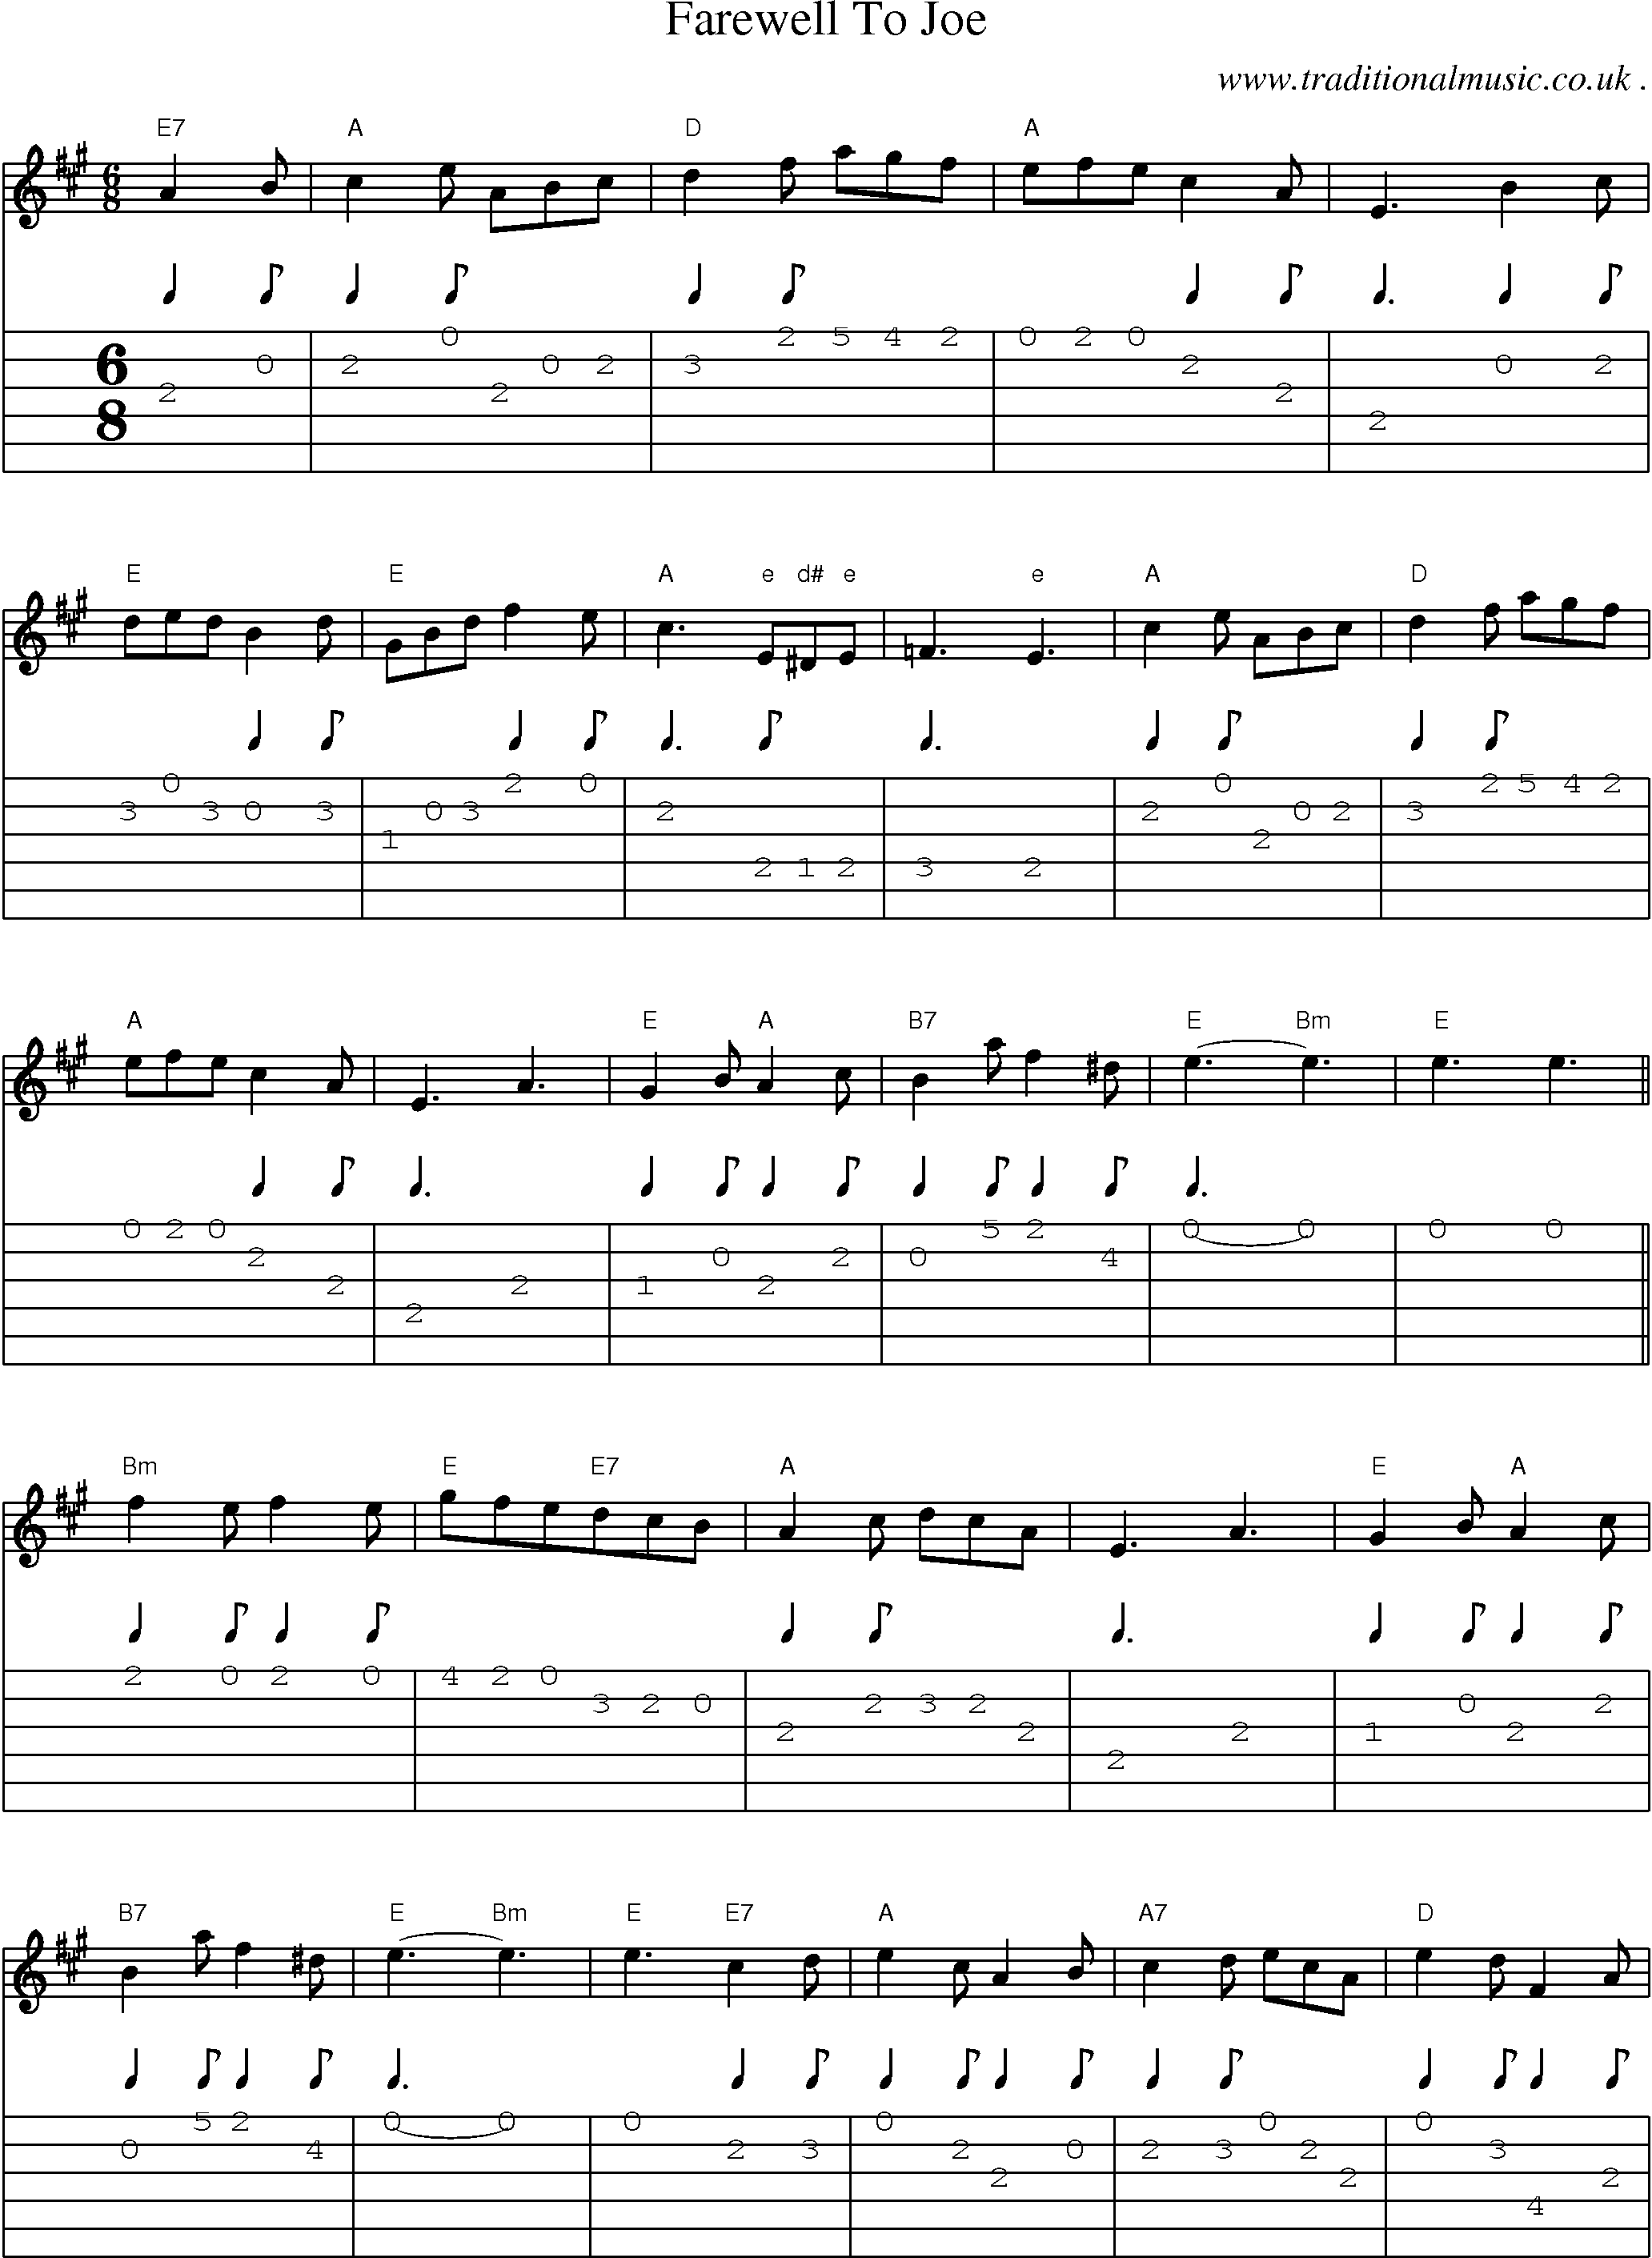 Sheet-Music and Guitar Tabs for Farewell To Joe